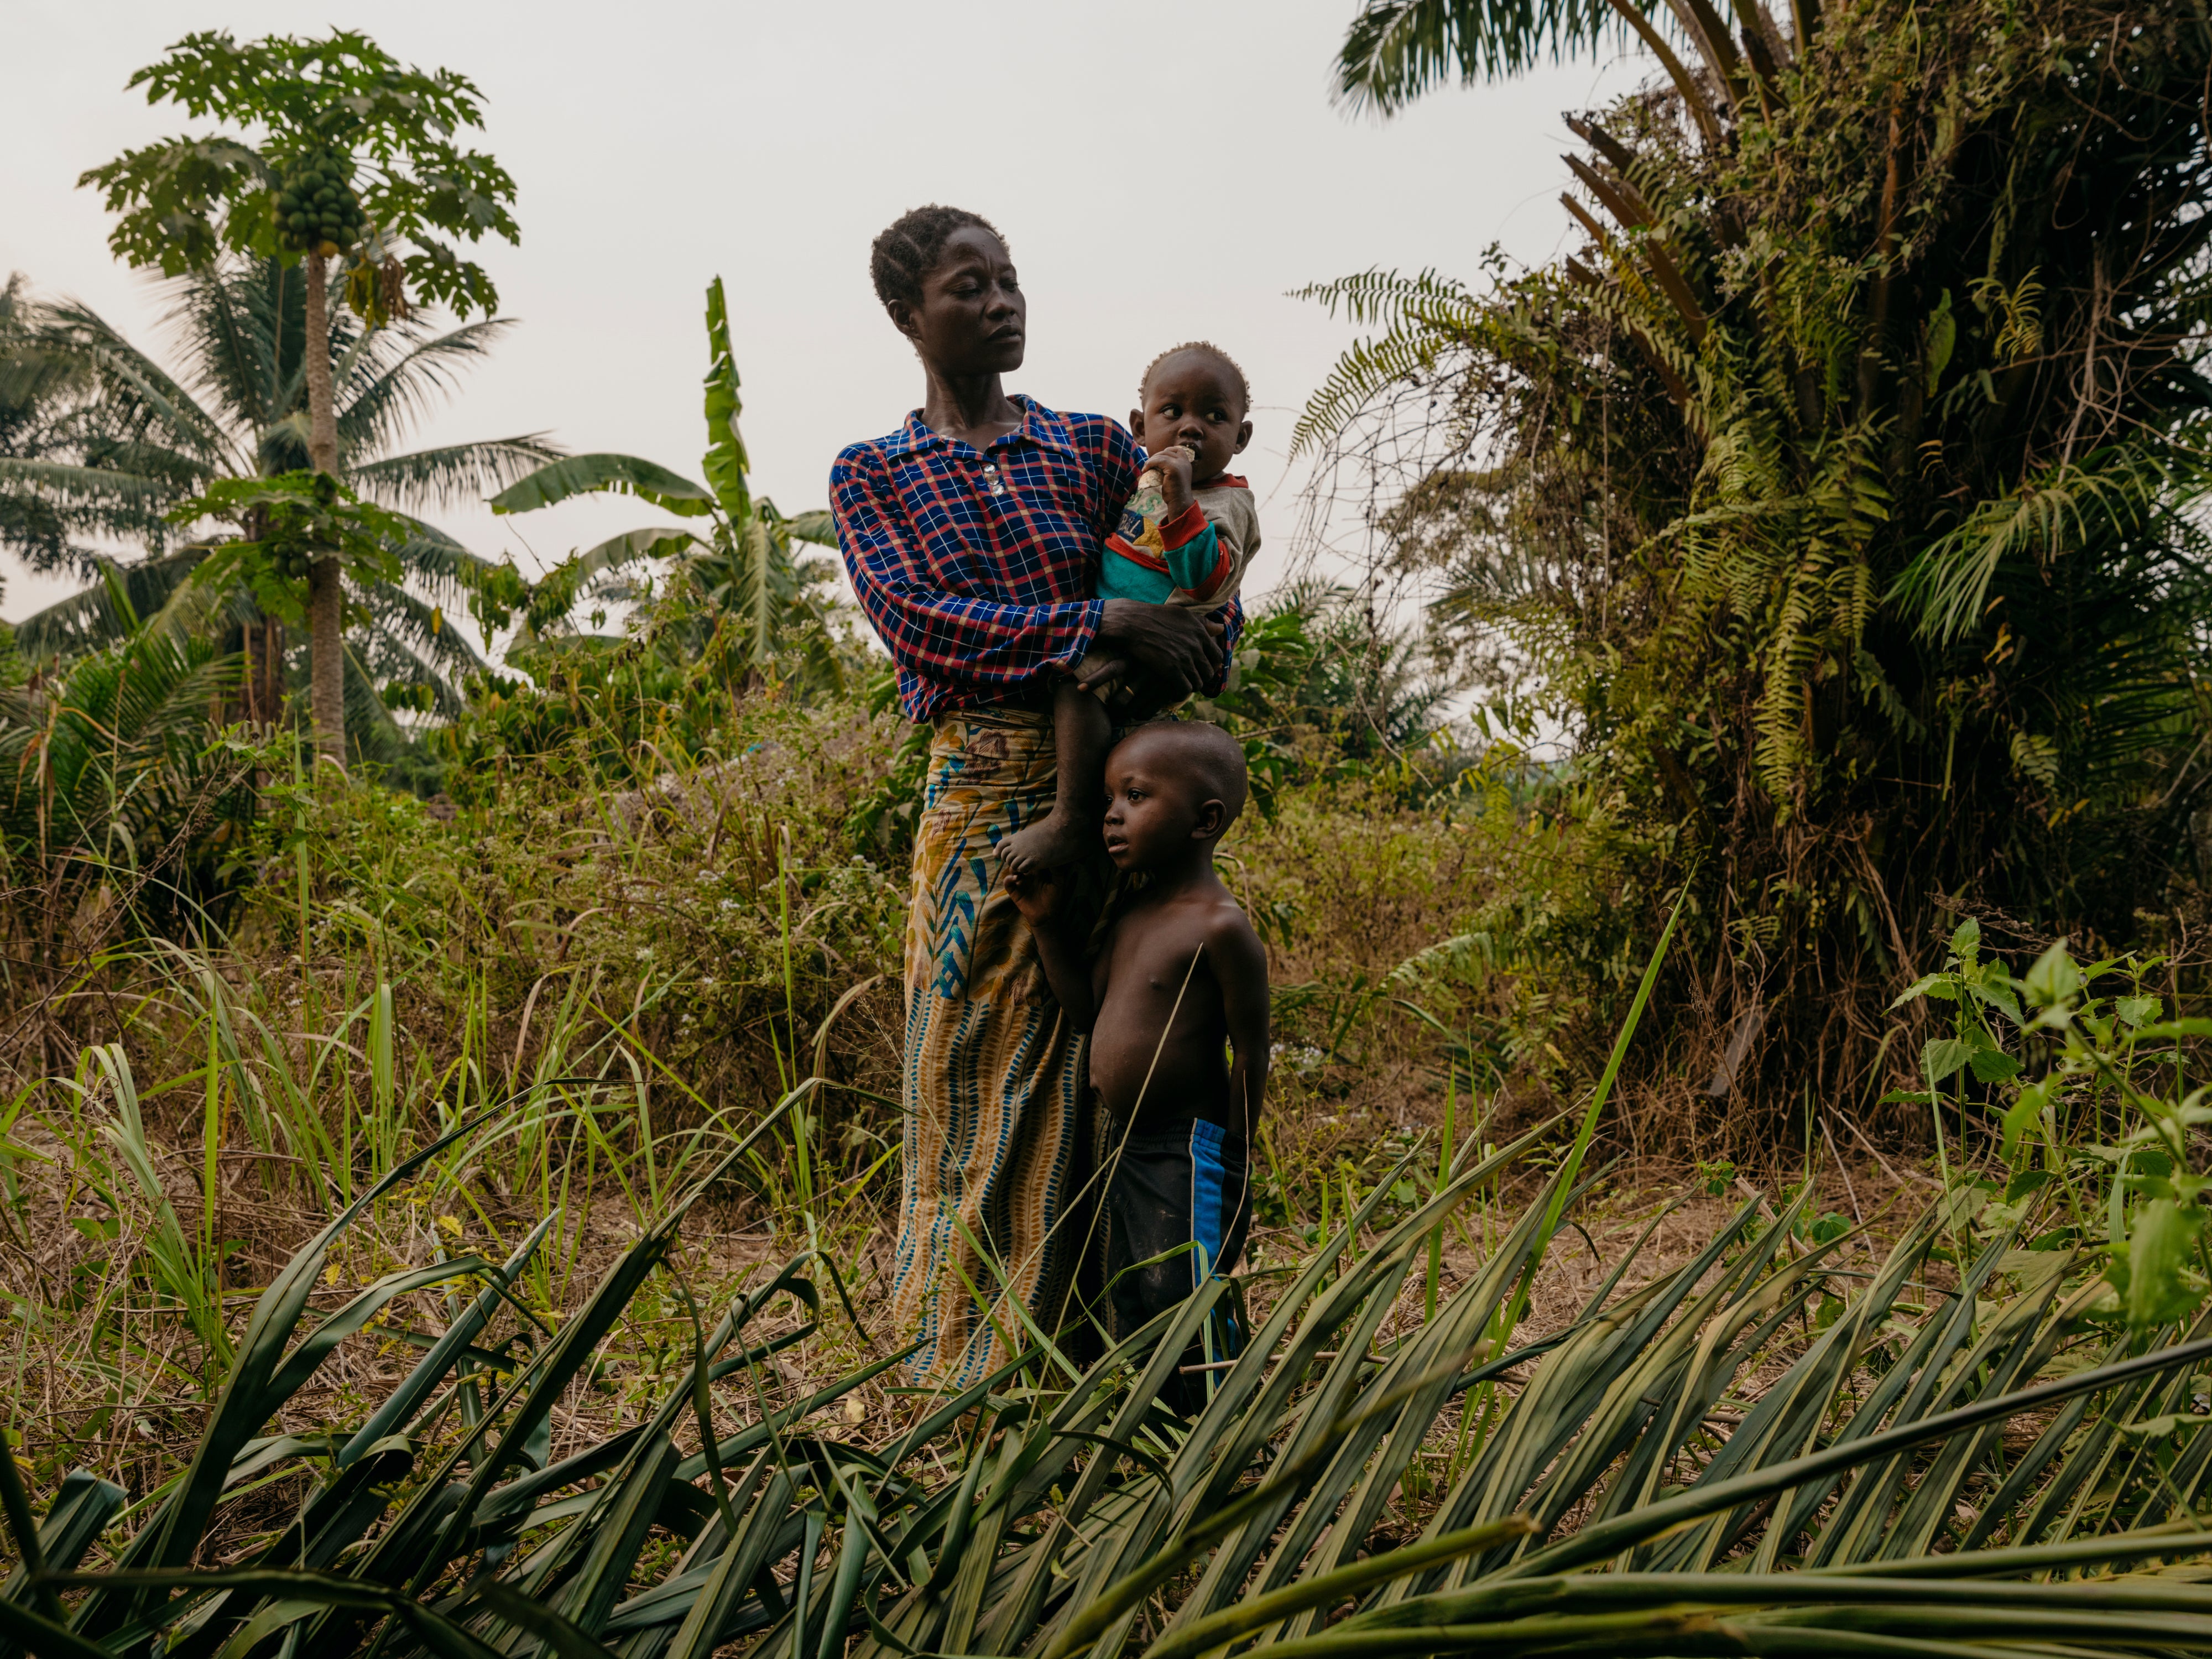 Delly* struggles to care for her children against a backdrop of conflict and food crisis and relies on Save the Children’s health centre in the area for medical support